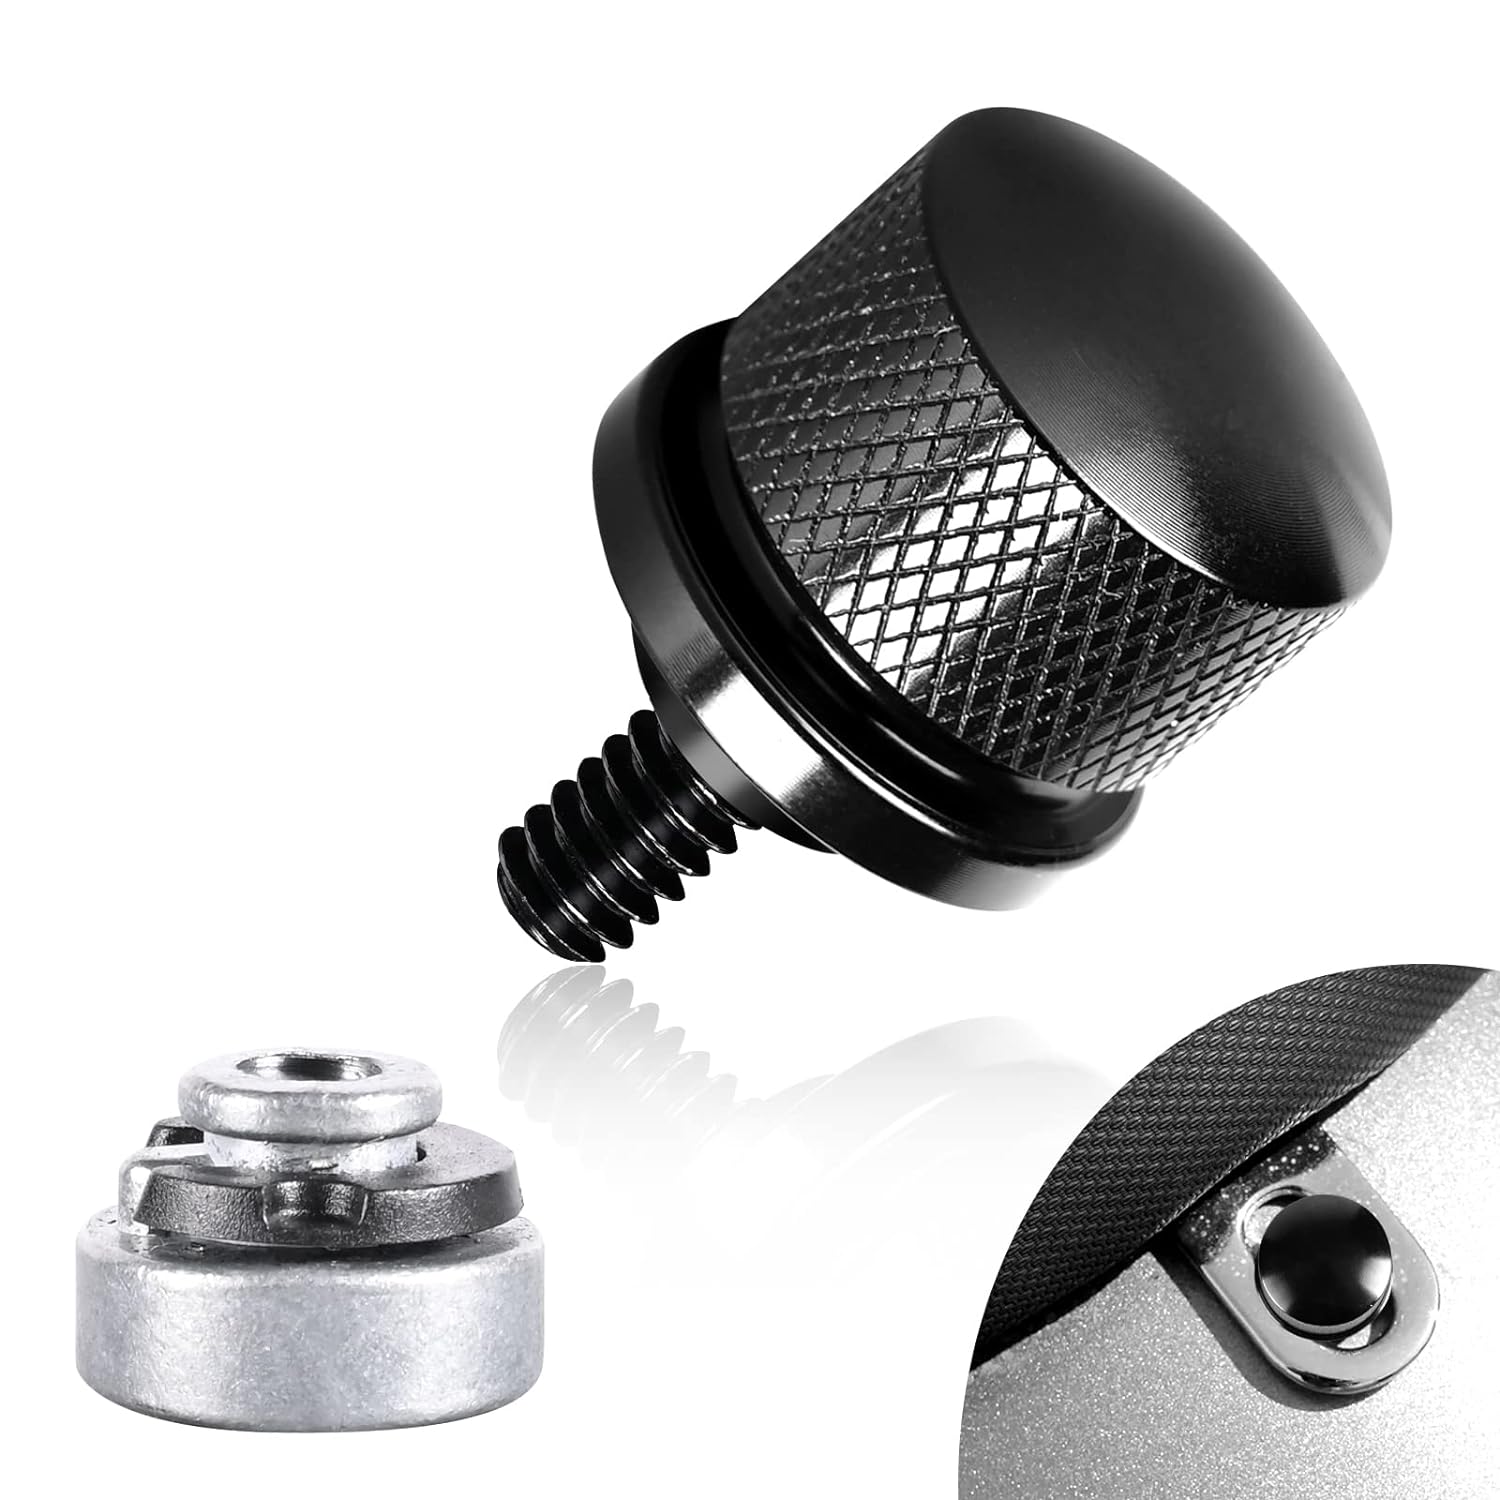 Hutexico Street Glide Sportster Seat Bolt for Harley, Motorcycle Rear Fender Knurled Screw for Dyna Sportster Softail Road Glide Street Touring King CVO Electra Iron 883 Bob 1996-2023 - Hutexico Street Glide Sportster Seat Bolt Review